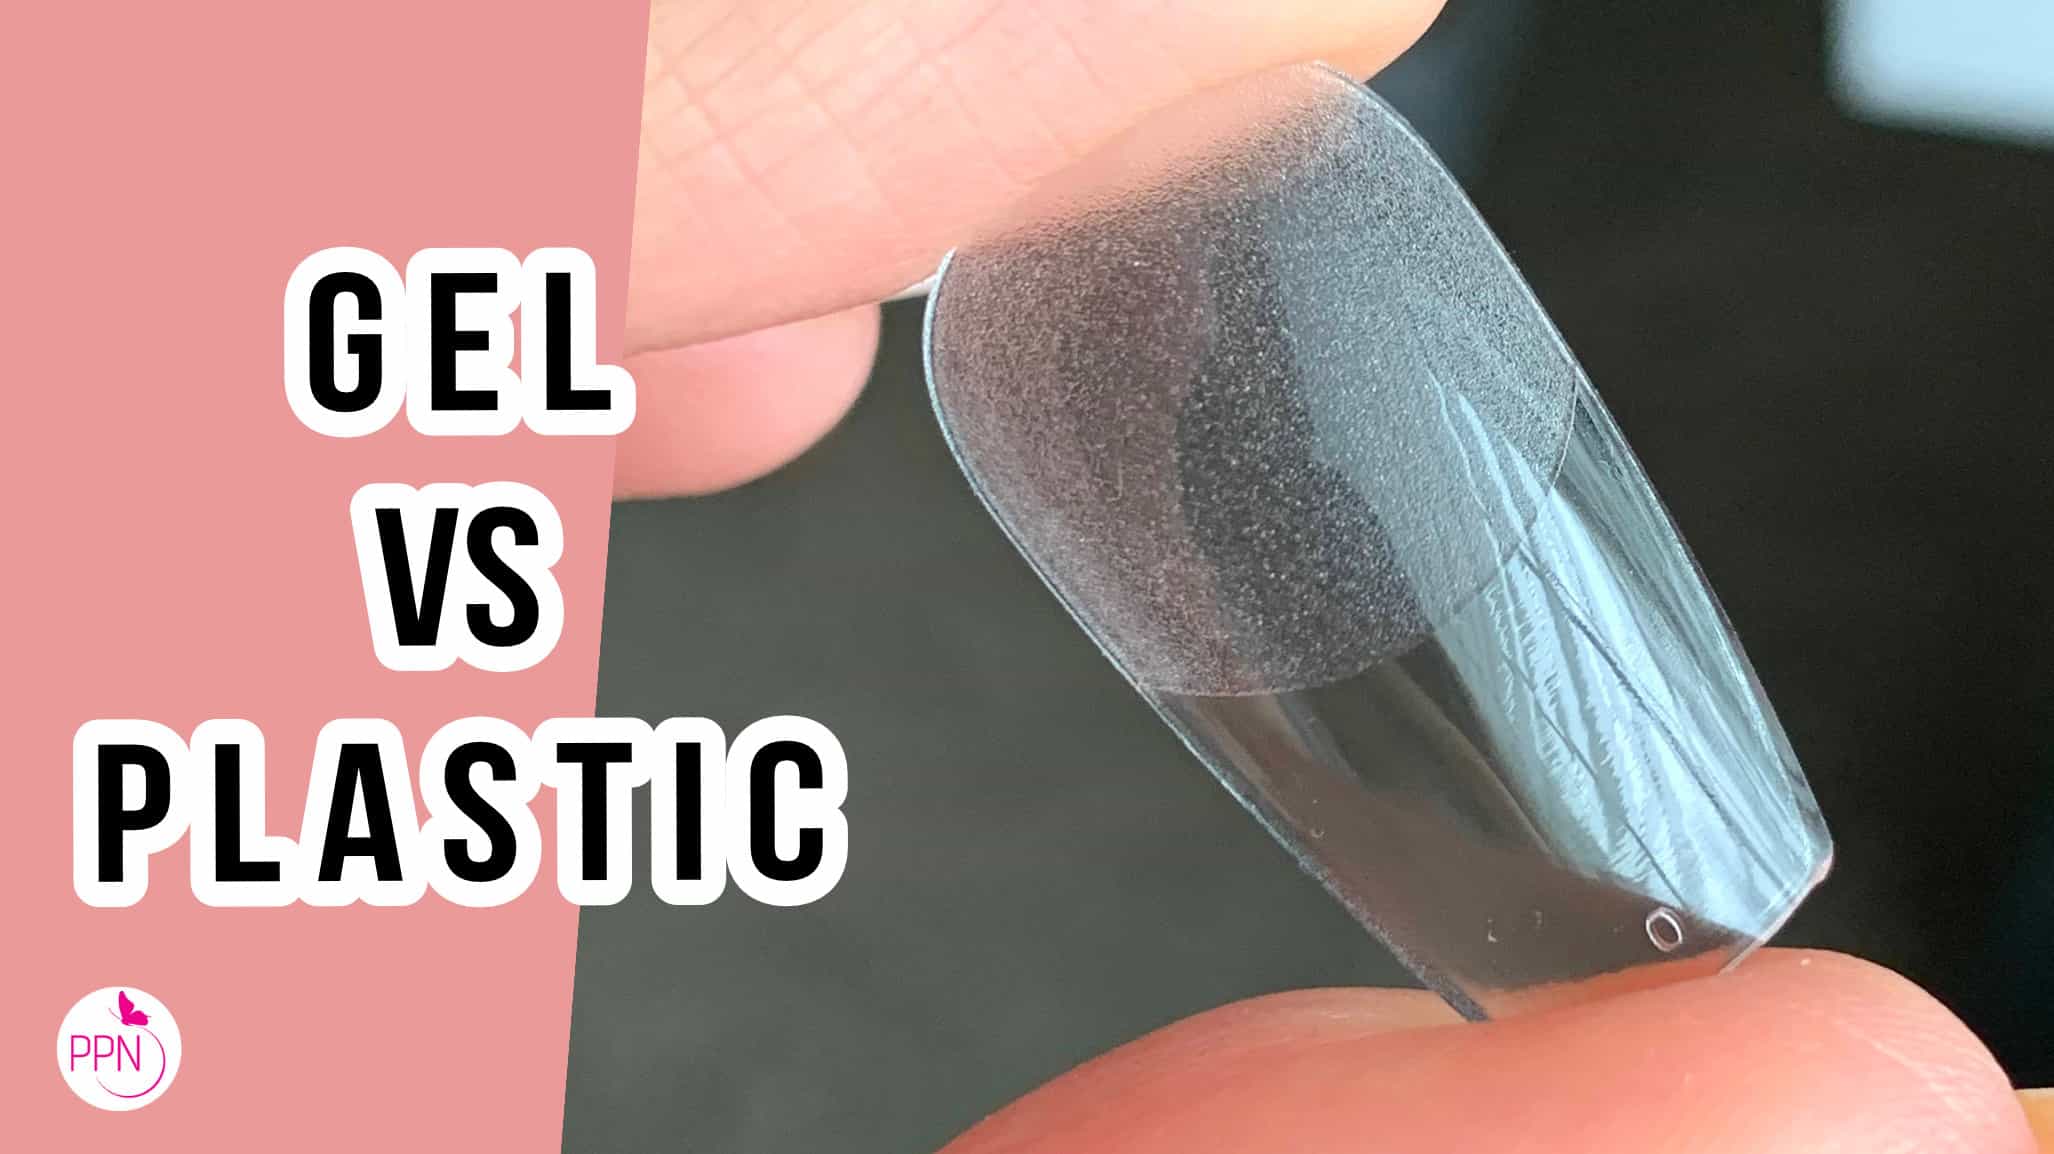 Do you know the differences? Let's talk about acrylic gels and